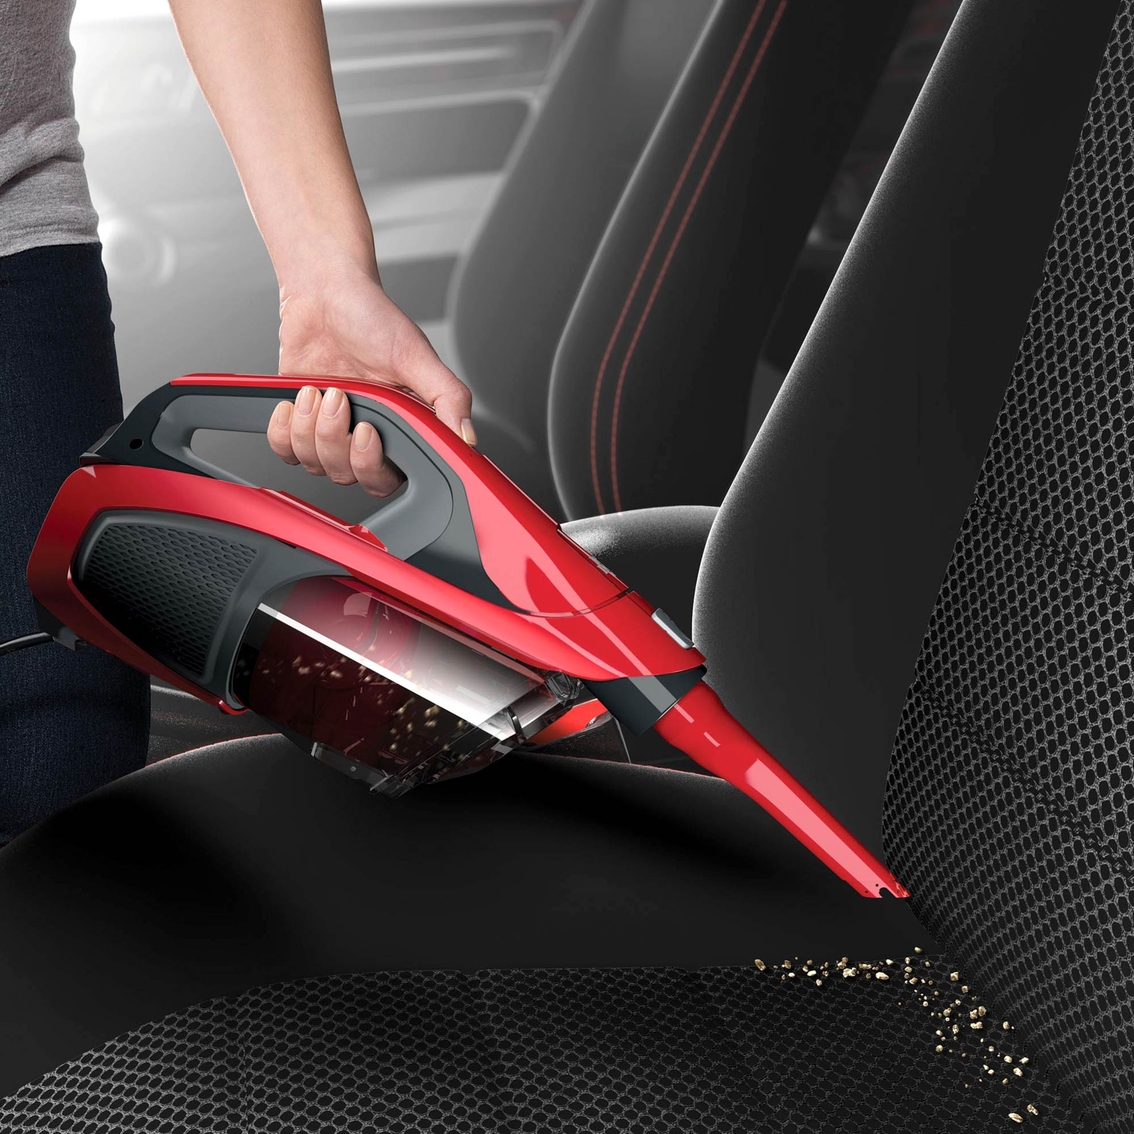 Dirt Devil 360 Reach Cyclonic Vacuum with Vac+Dust Tools and SWIPES Pads - Image 3 of 4